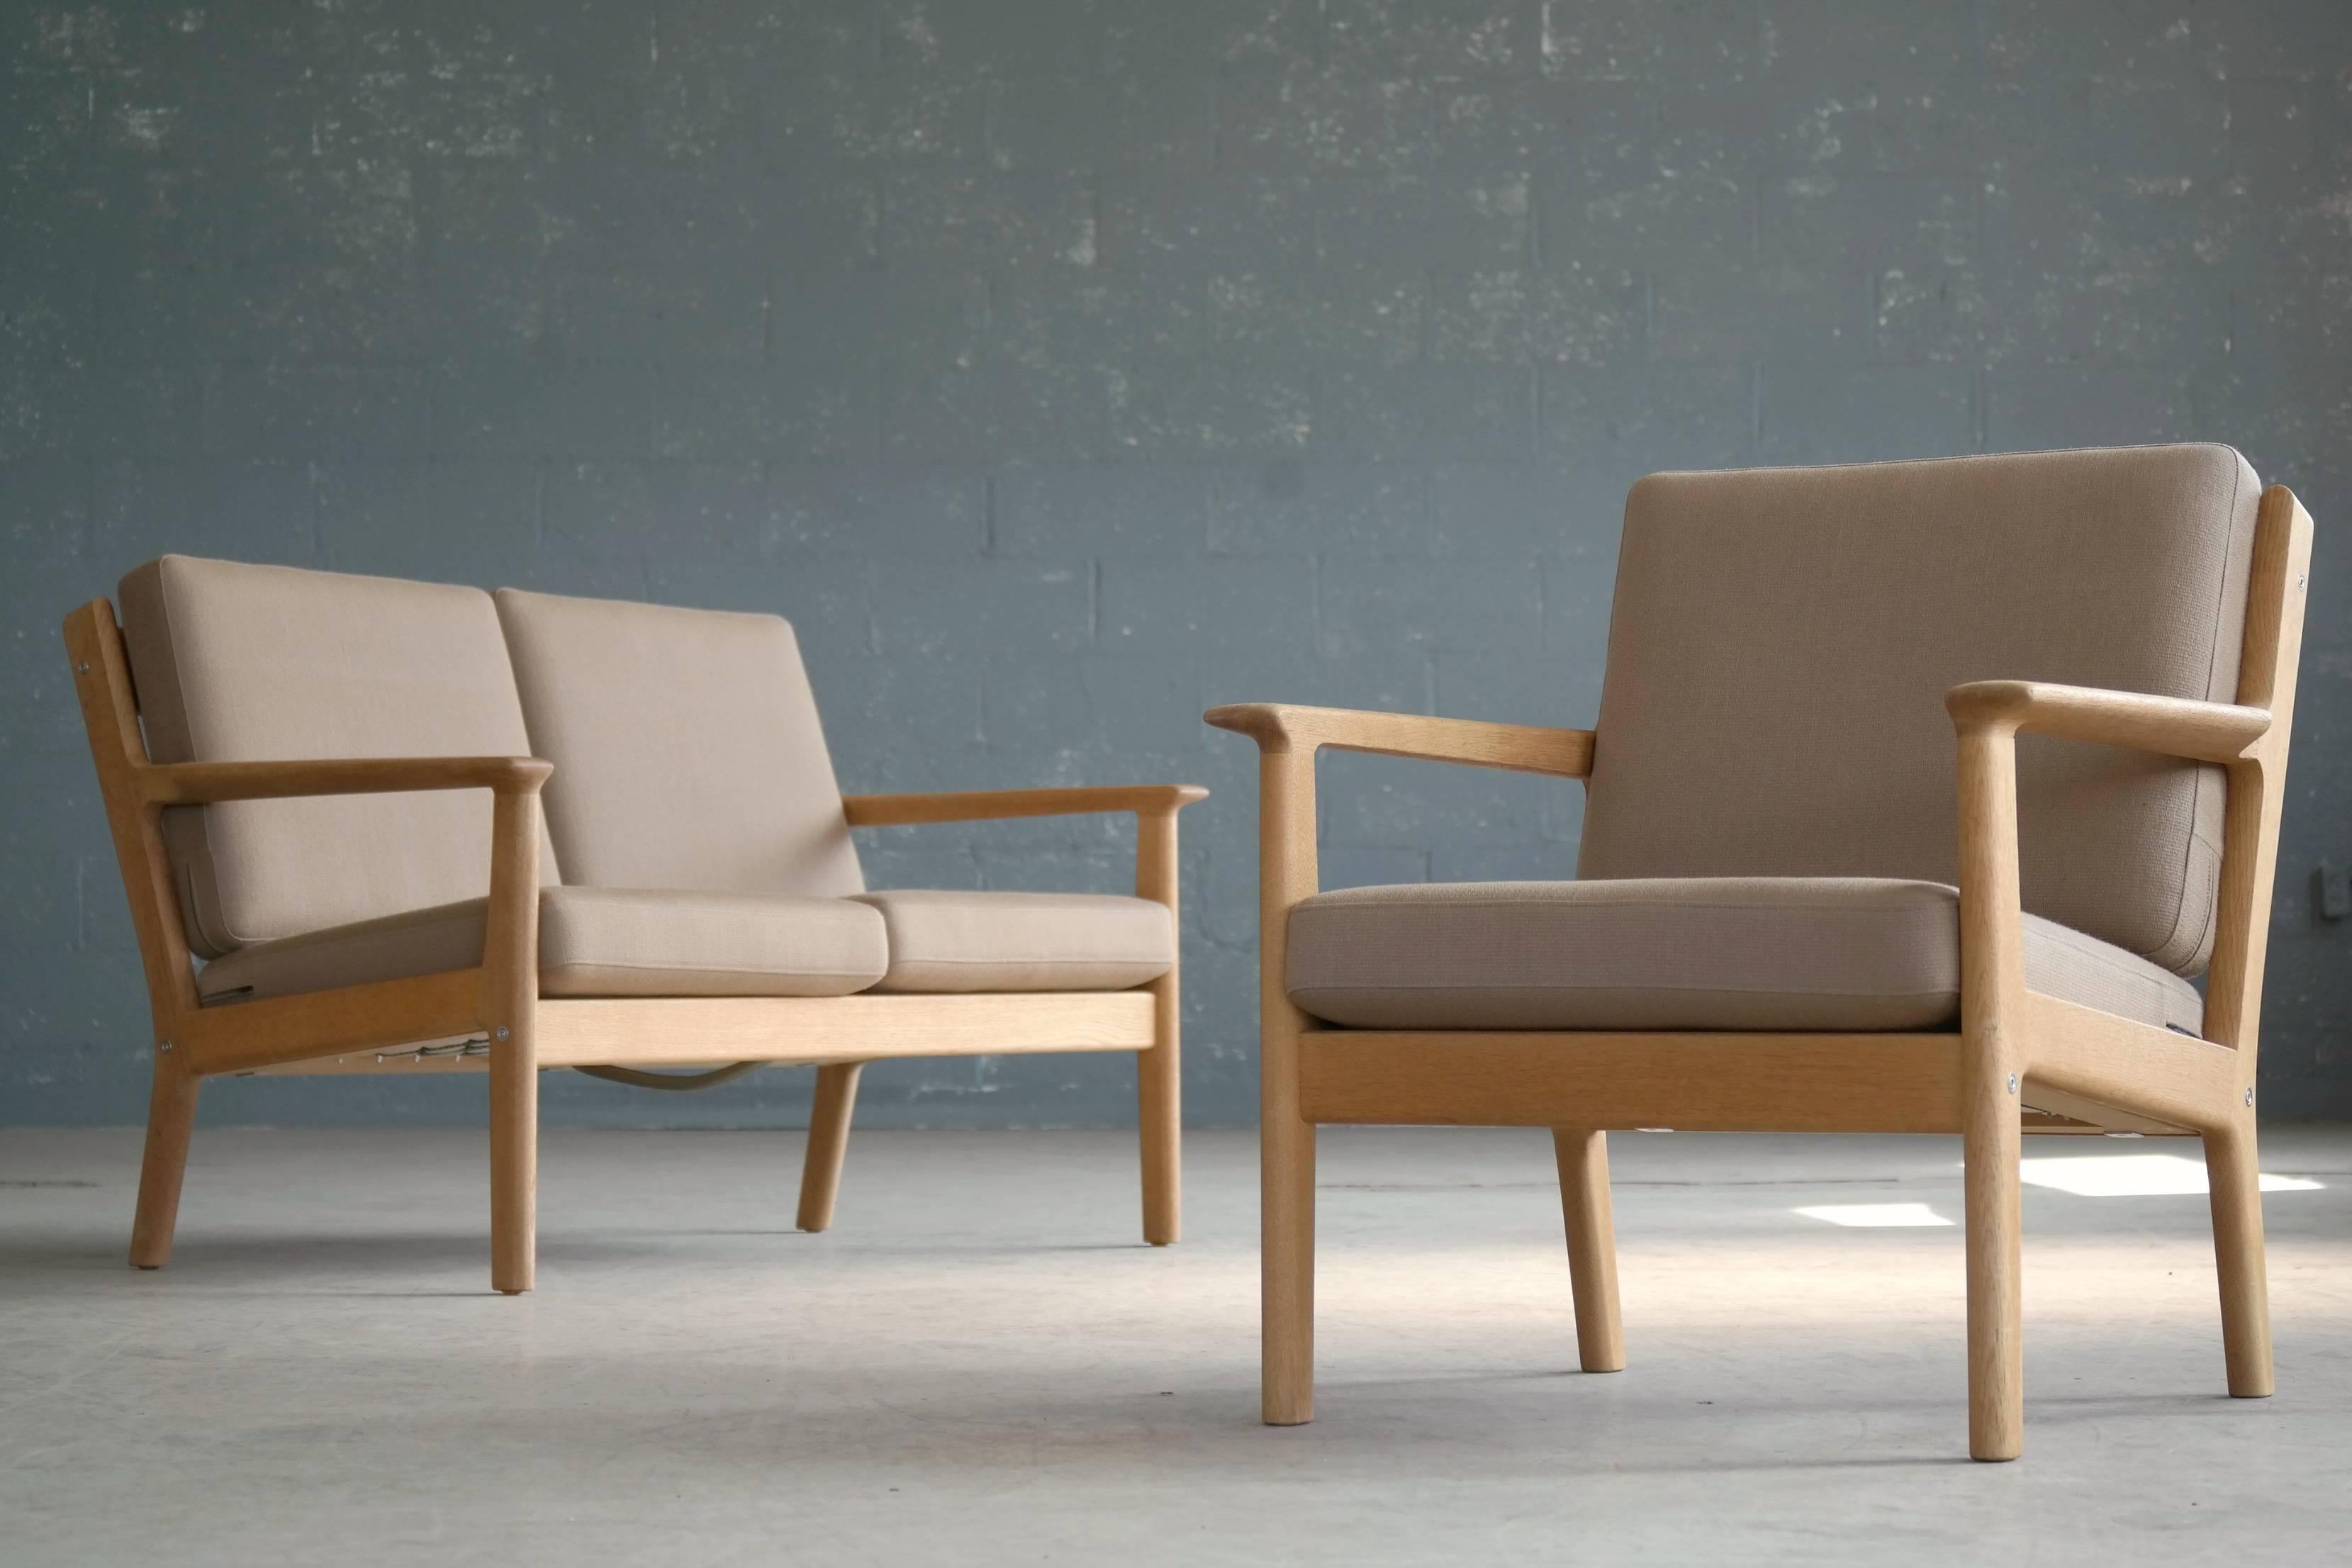 The model GE265 two-seat with matching easy chair were designed by Hans J Wegner for GETAMA in the early 1970s featuring a solid oak frame and wool covered foam cushions. The cushions remain in their original wool. The set is in excellent vintage